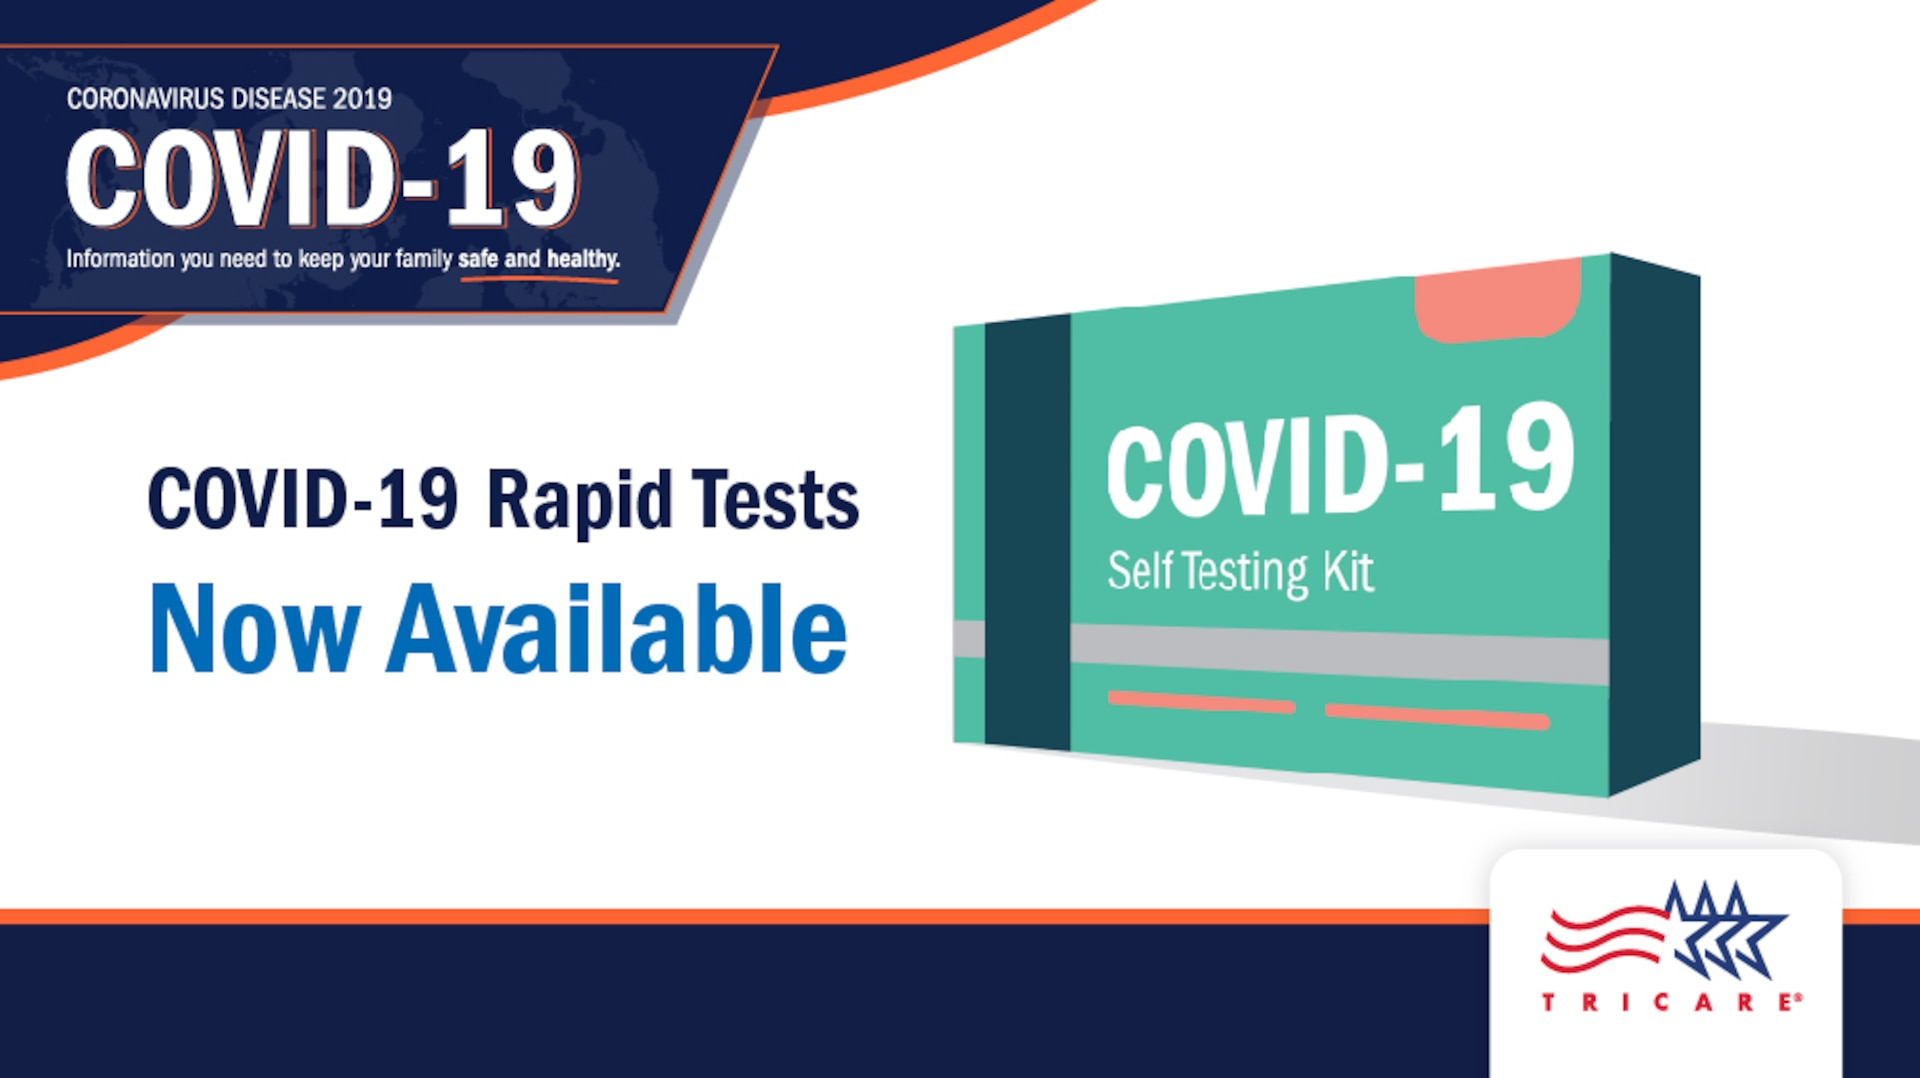 Graphic with a COVID test kit and the text "COVID-19 Rapid Tests Now Available"